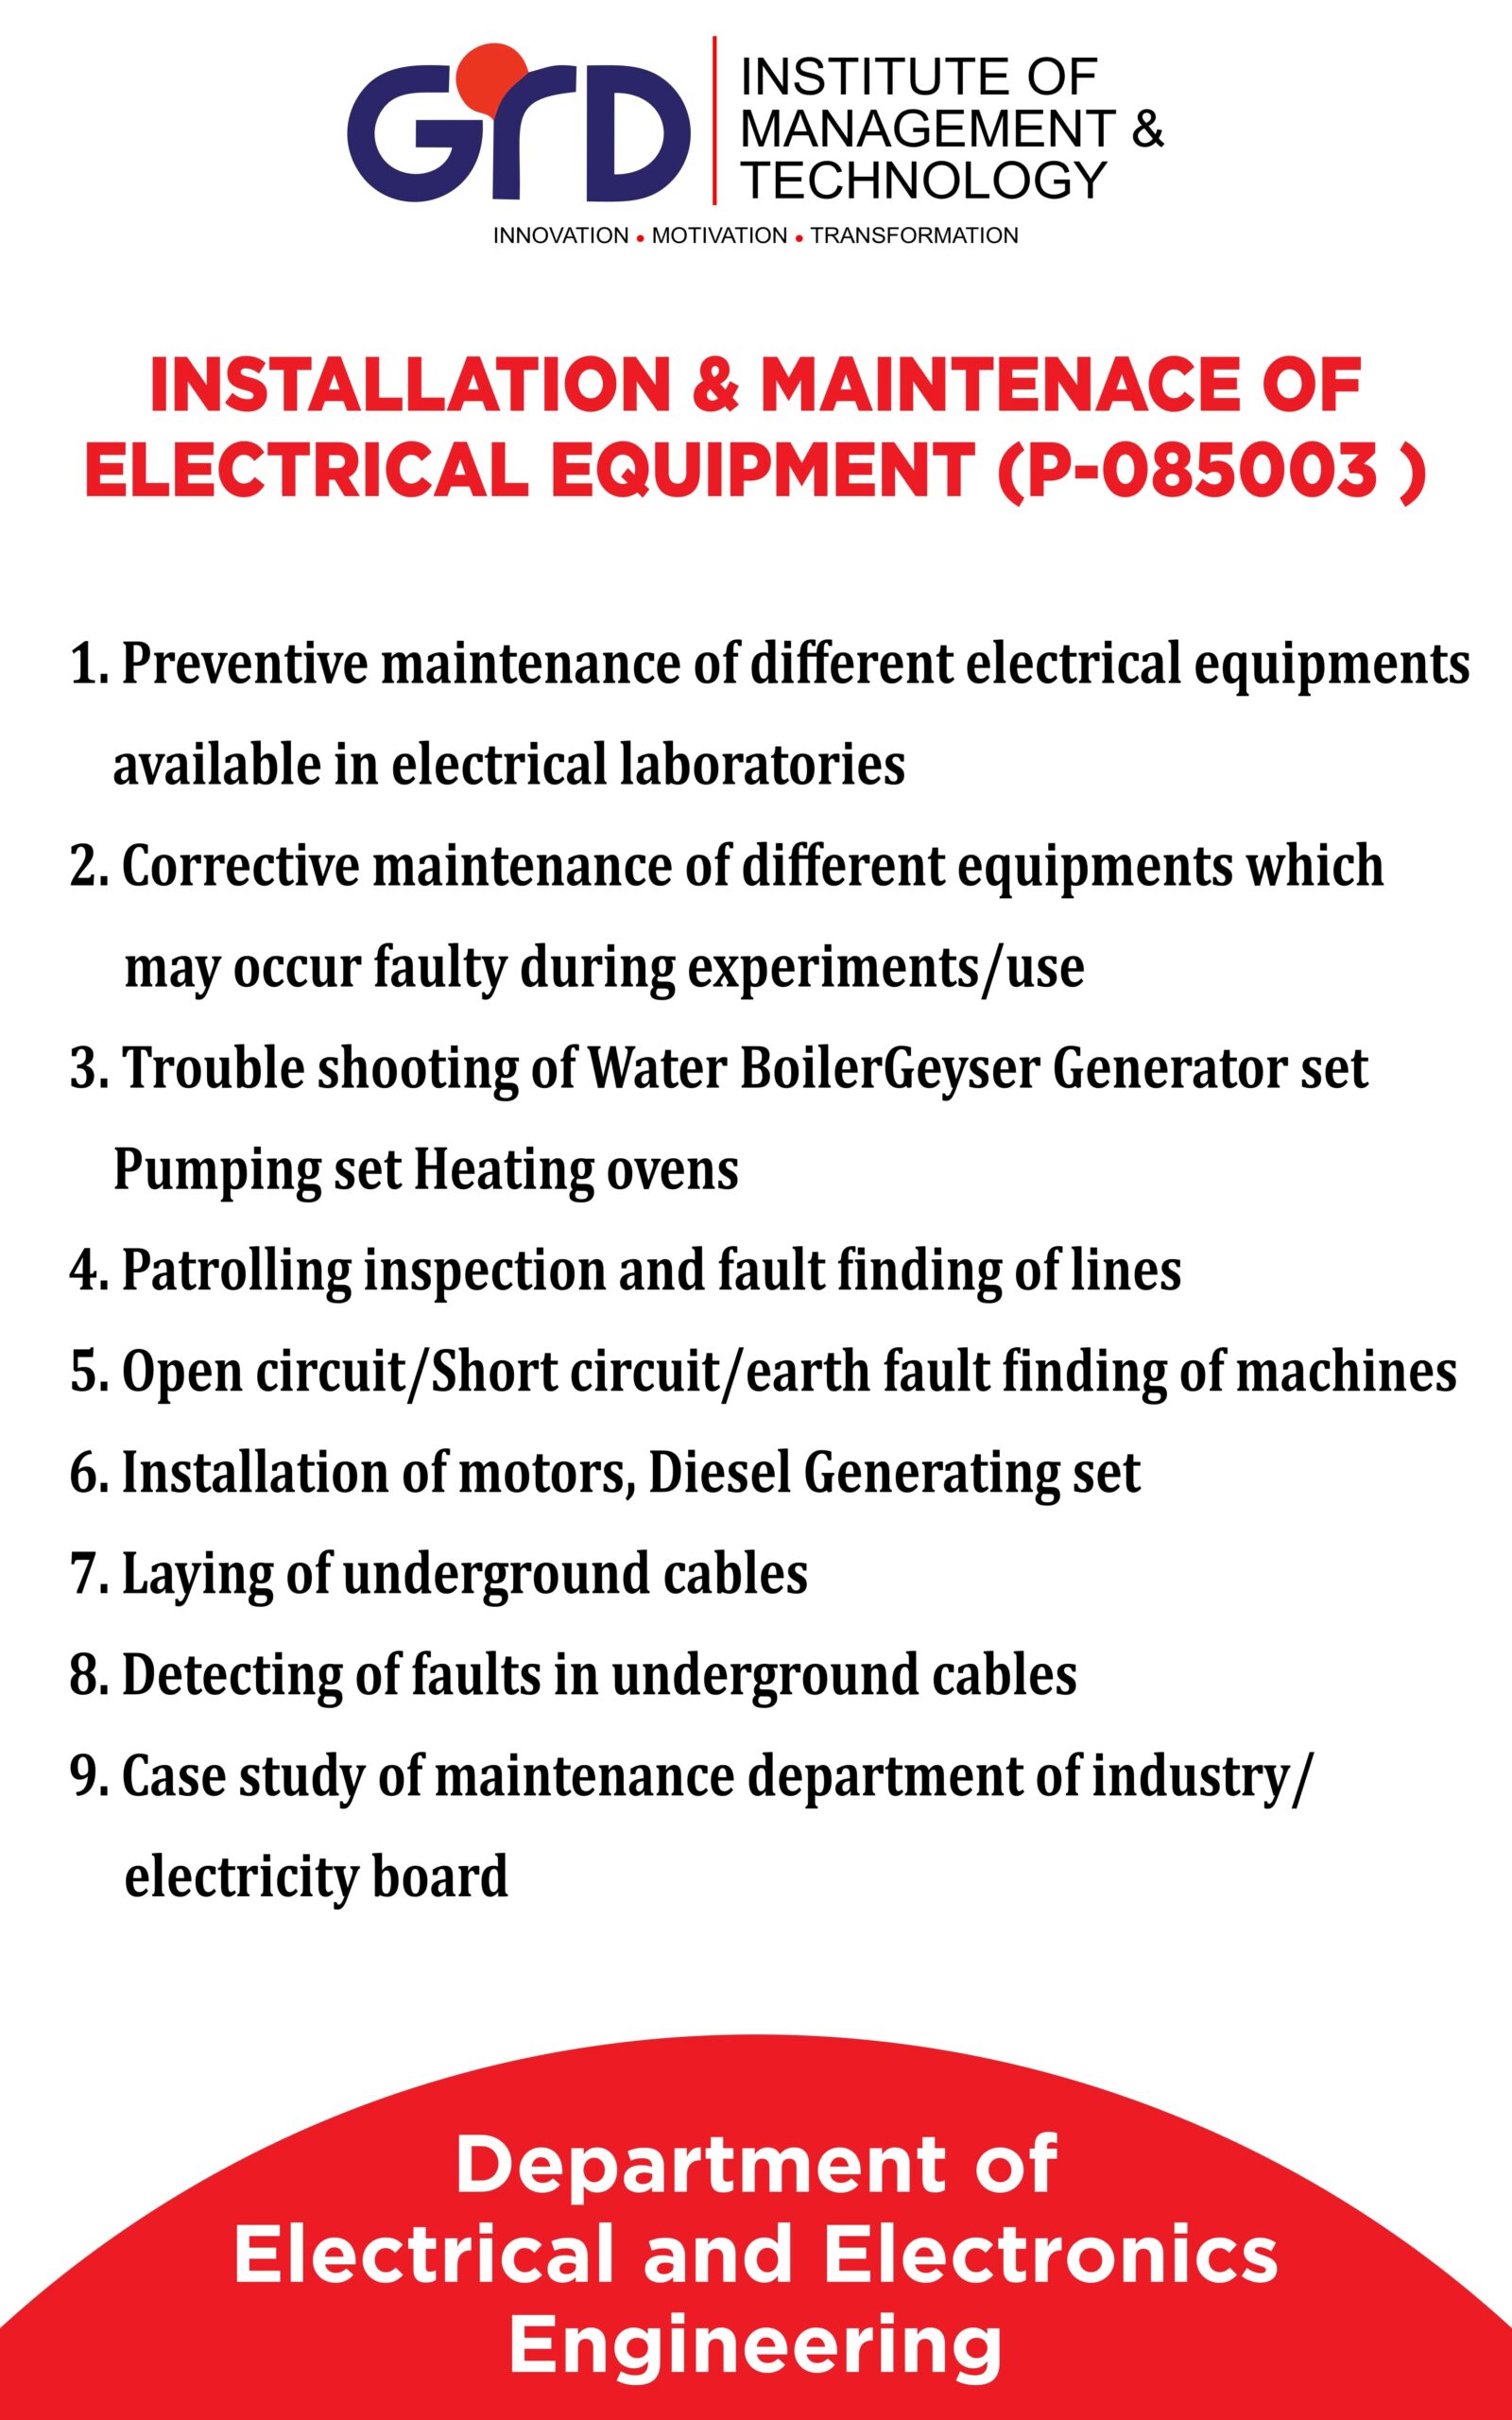 INSTALLATION & MAINTENACE OF ELECTRICAL EQUIPMENT